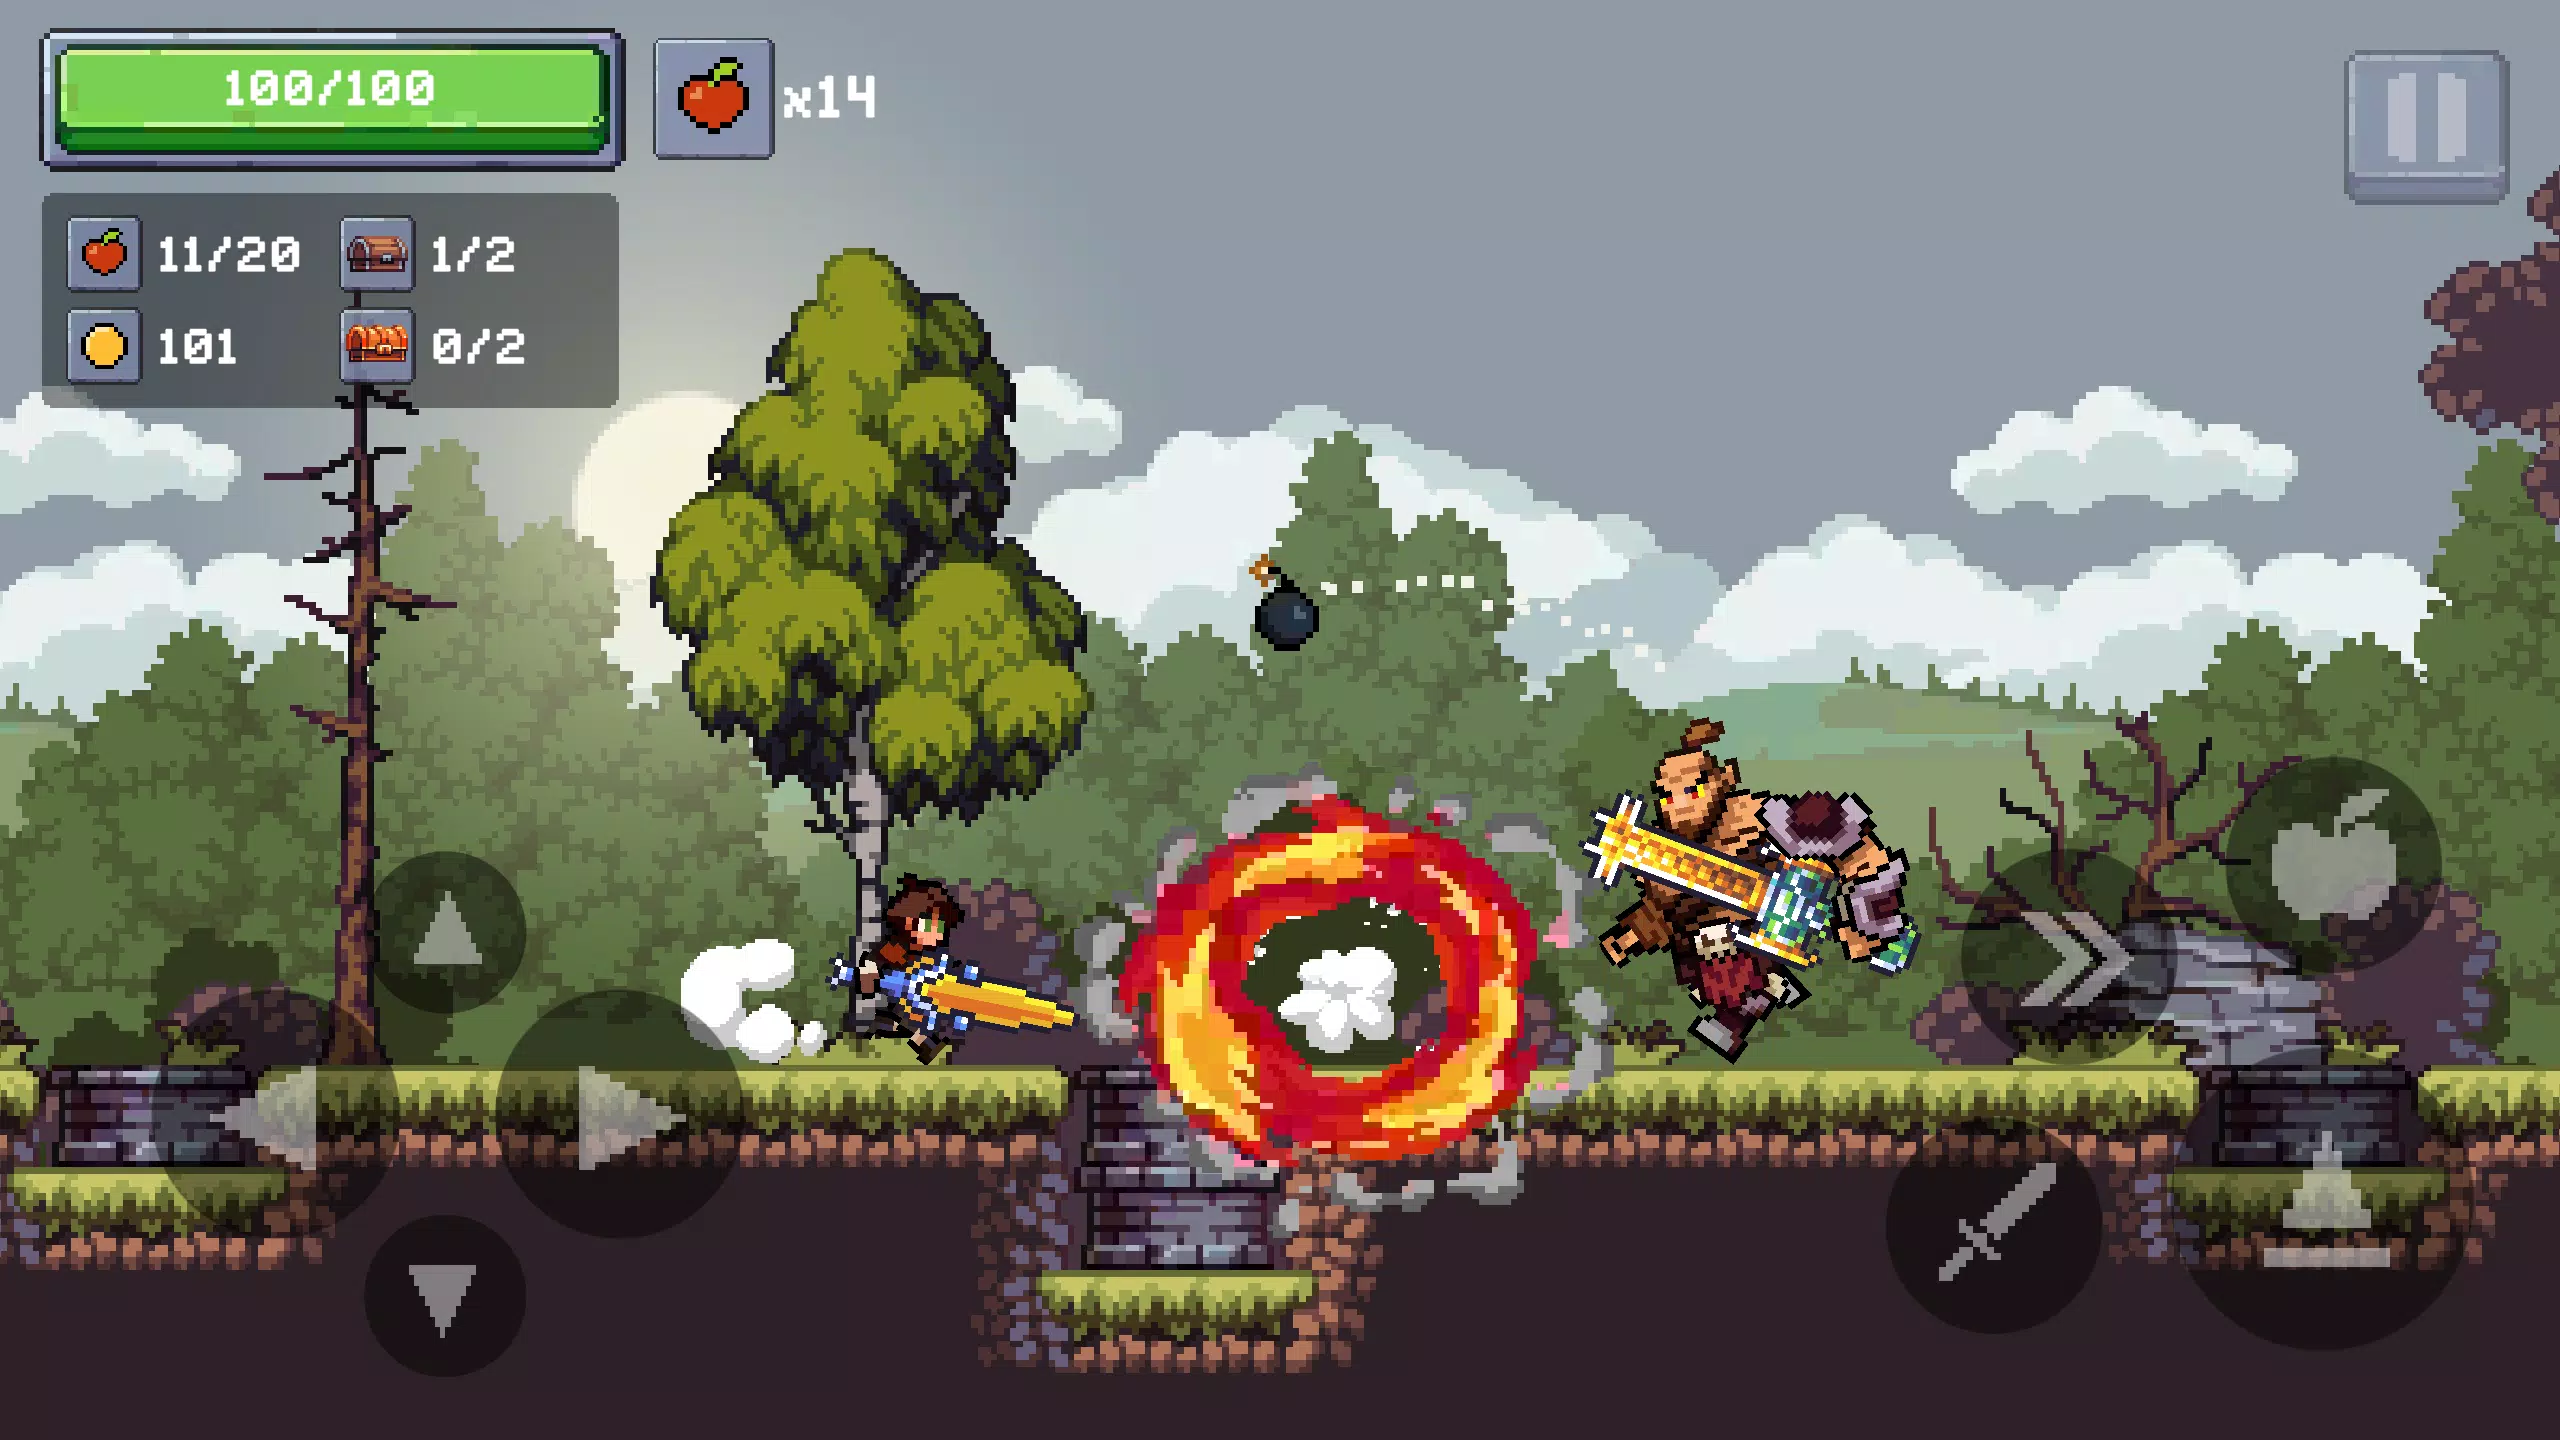 Apple Knight for Android - Download the APK from Uptodown